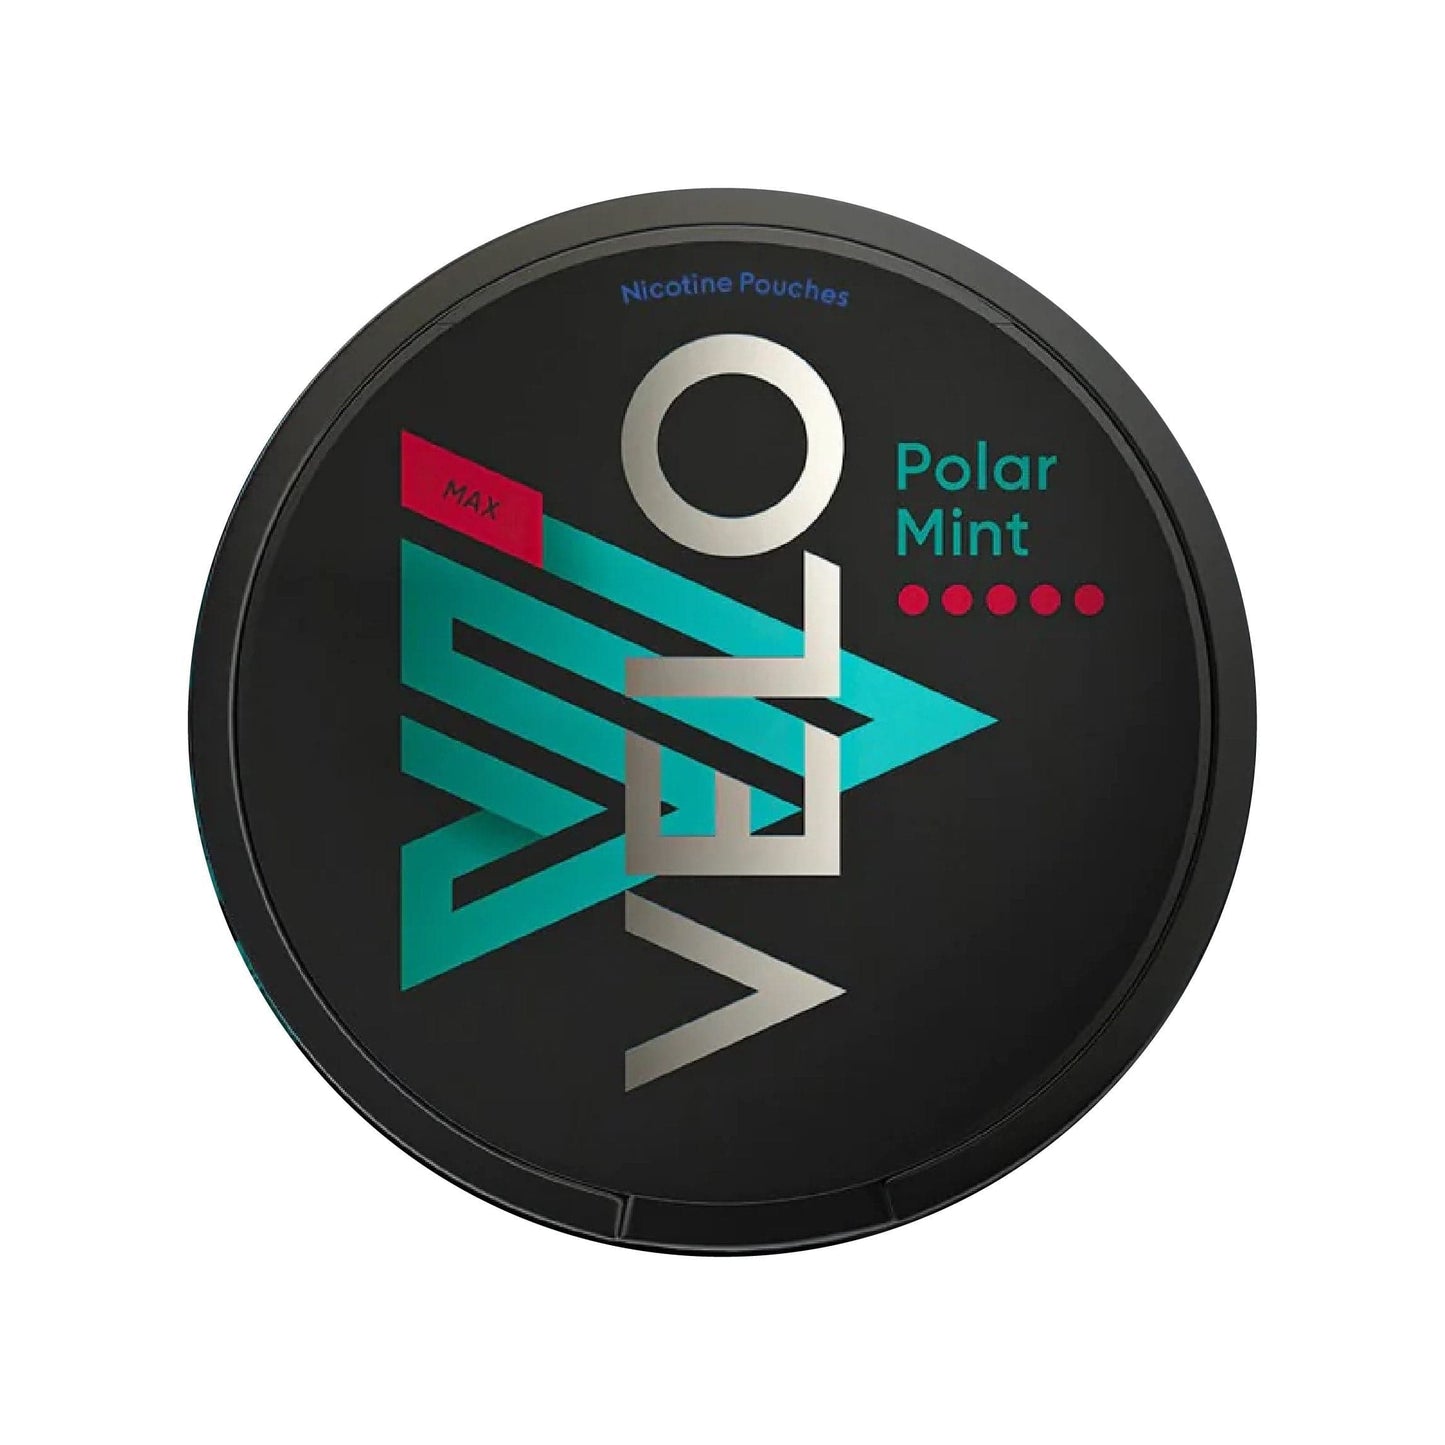 Buy VELO Nicotine Pouches In Different Flavors At Best Price In Pakistan